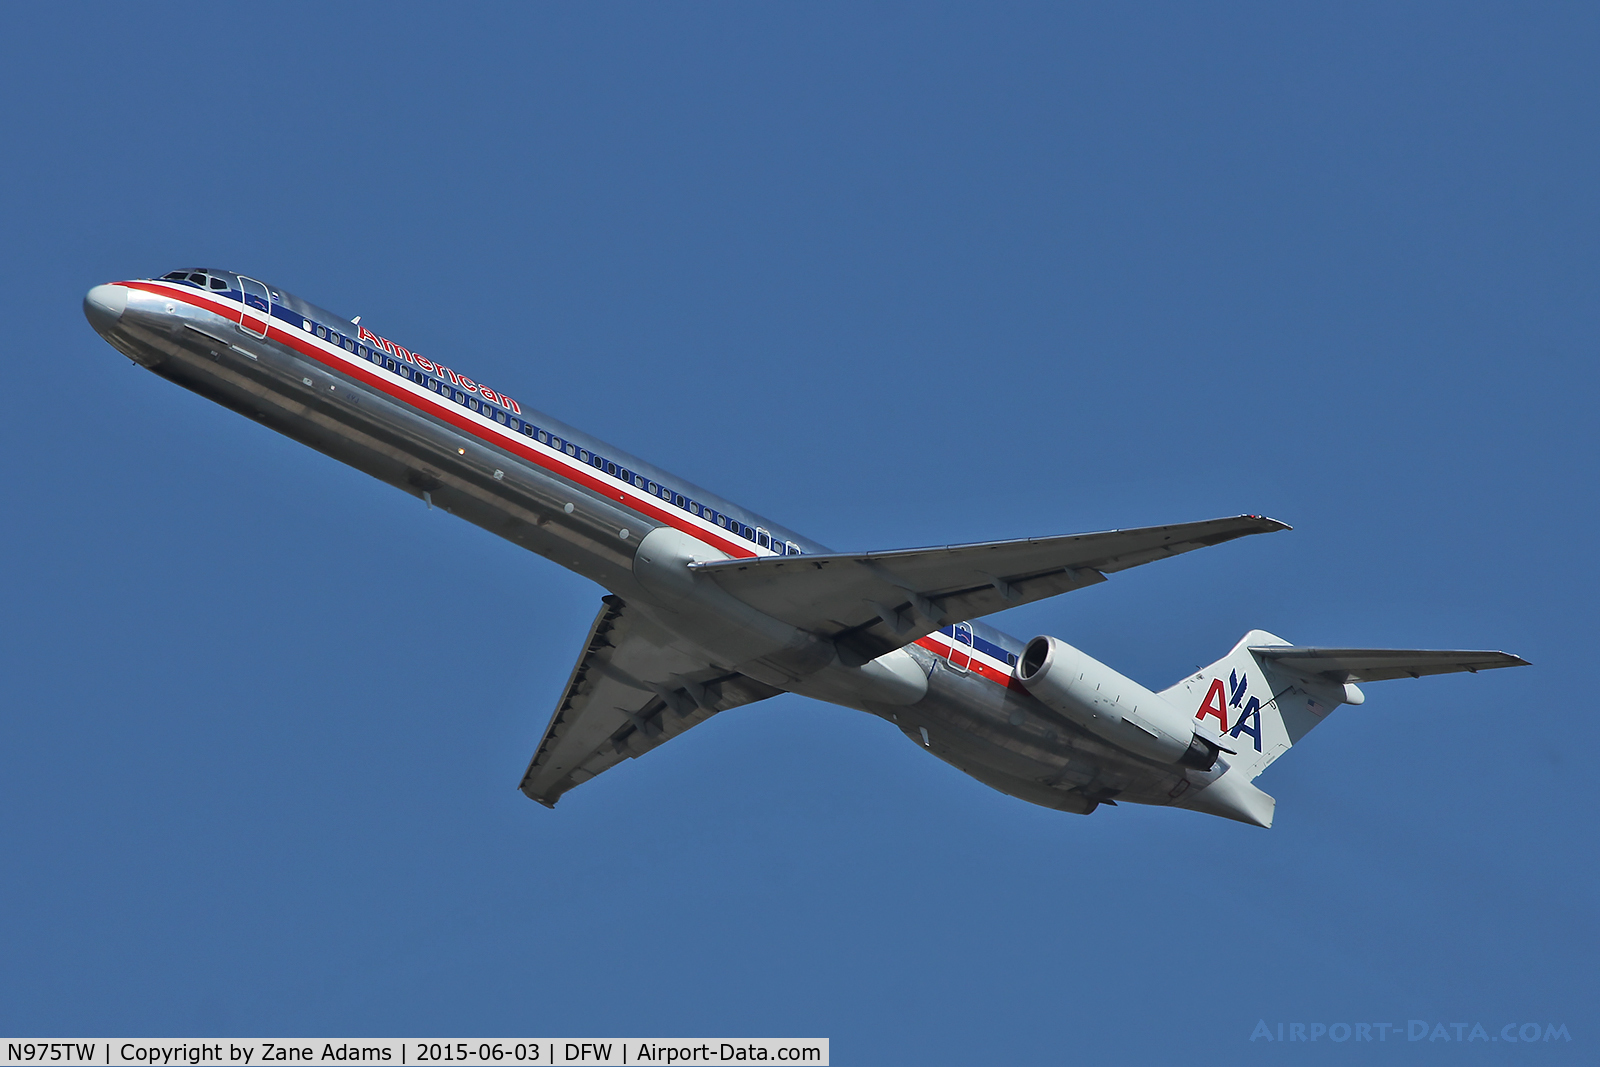 N975TW, 1999 McDonnell Douglas MD-83 (DC-9-83) C/N 53625, Departing DFW Airport